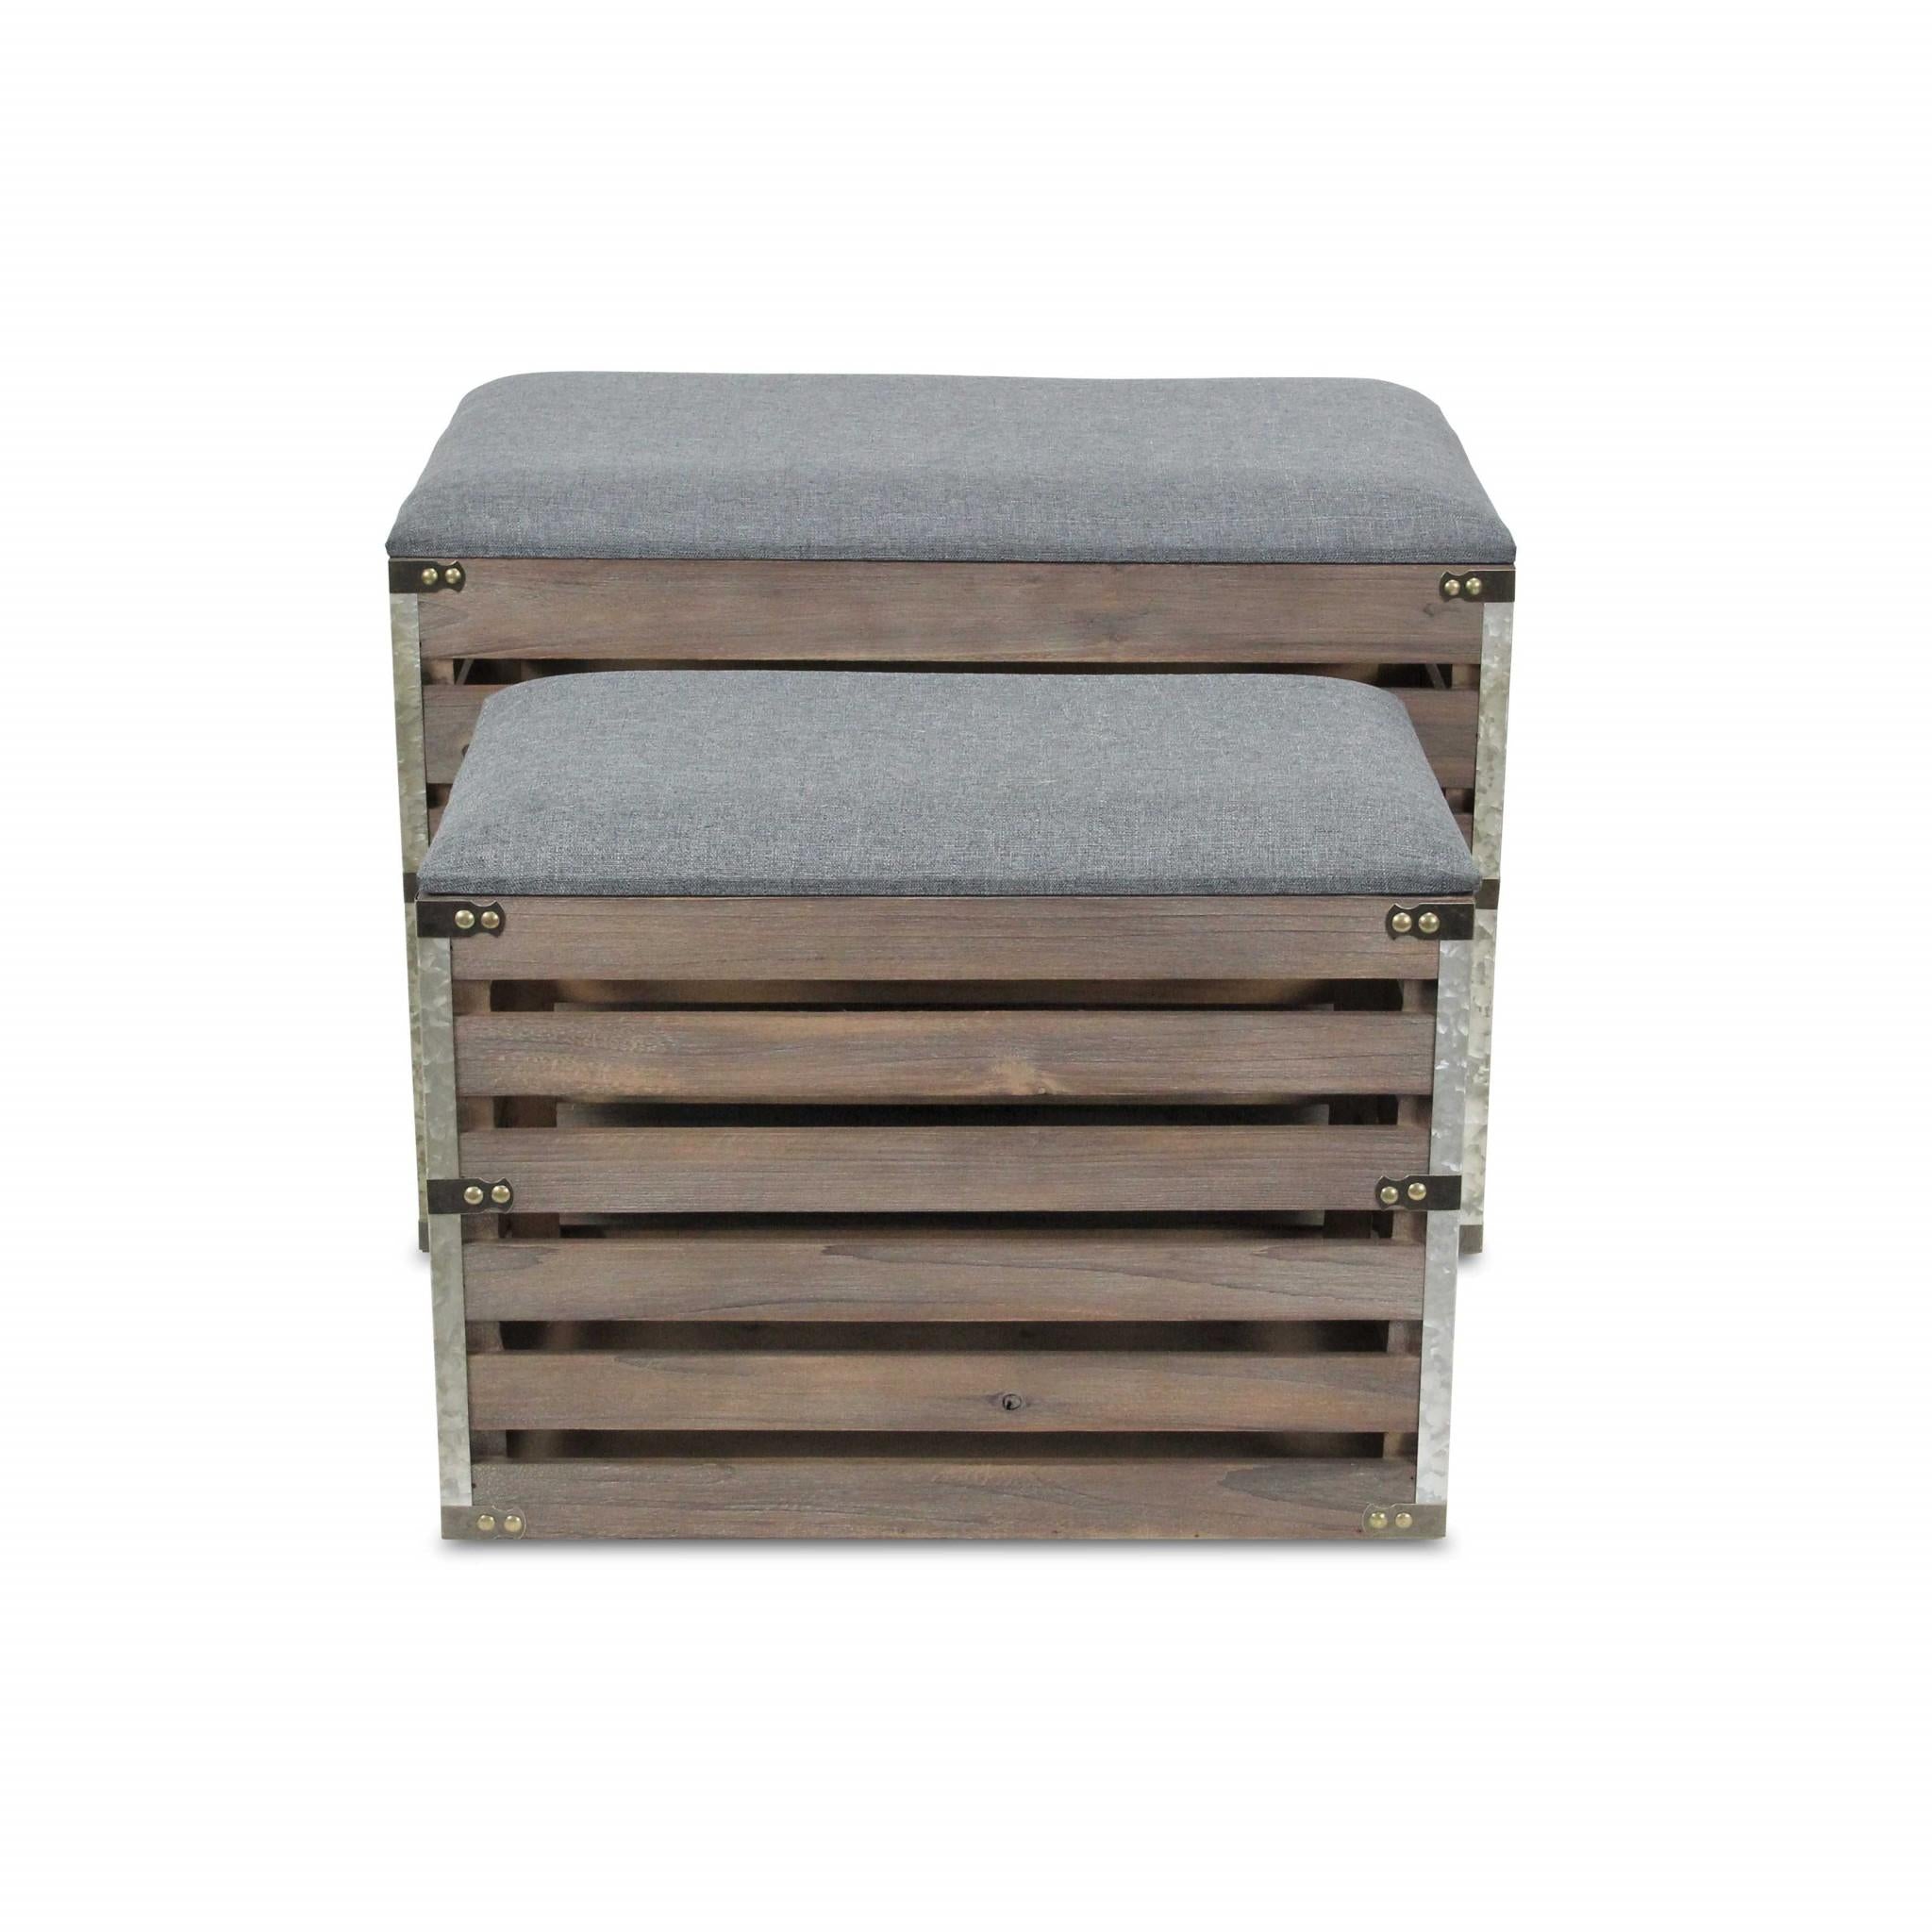 Set of 2 Rectangular Gray Linen Fabric and Wood Slats Storage Benches